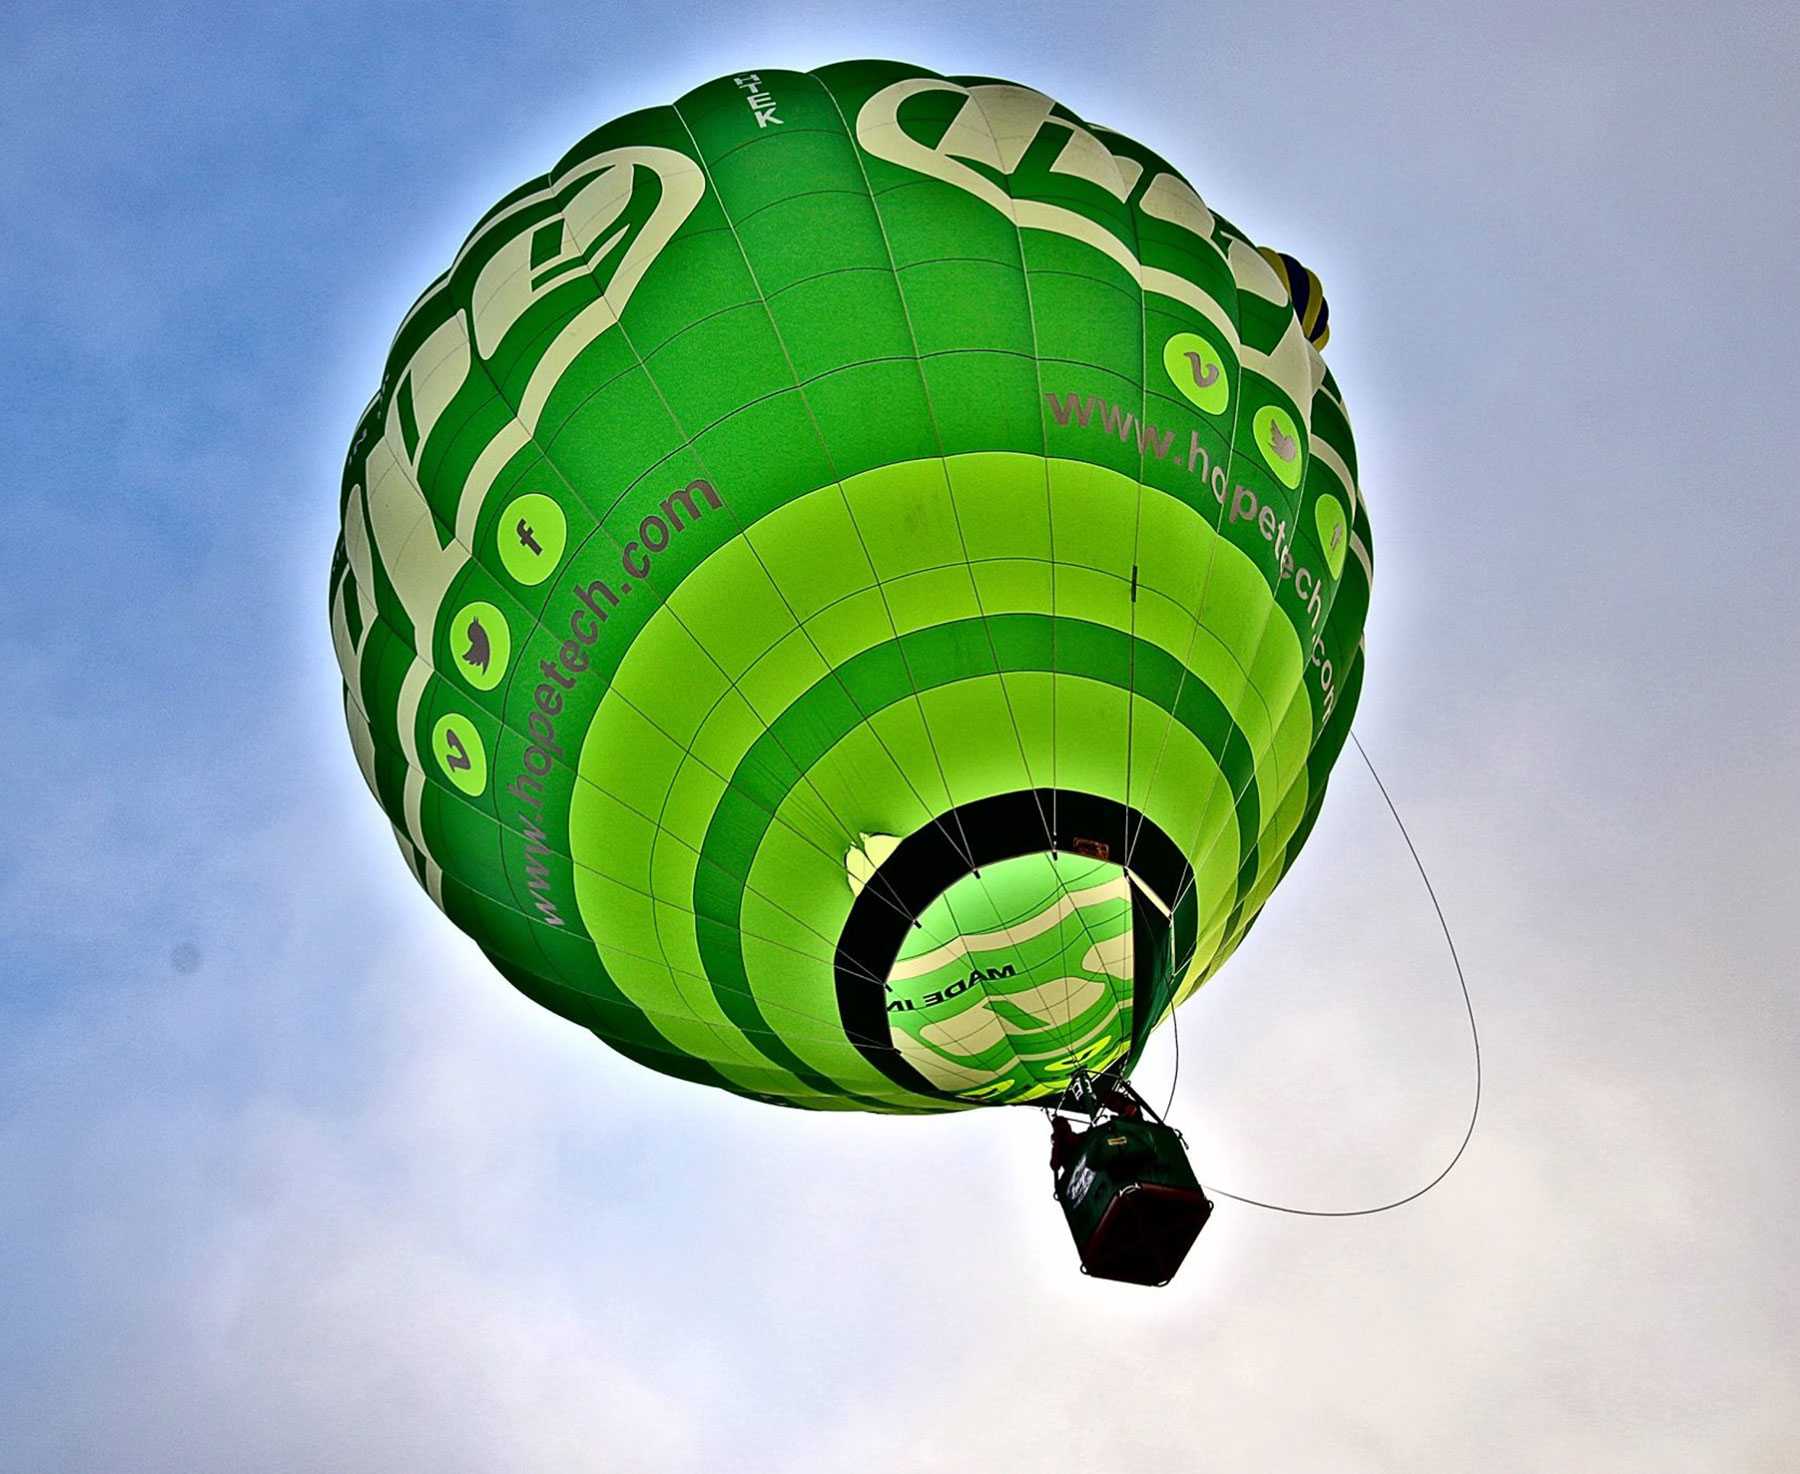 Hot Air Ballooning in the Yorkshire Dales